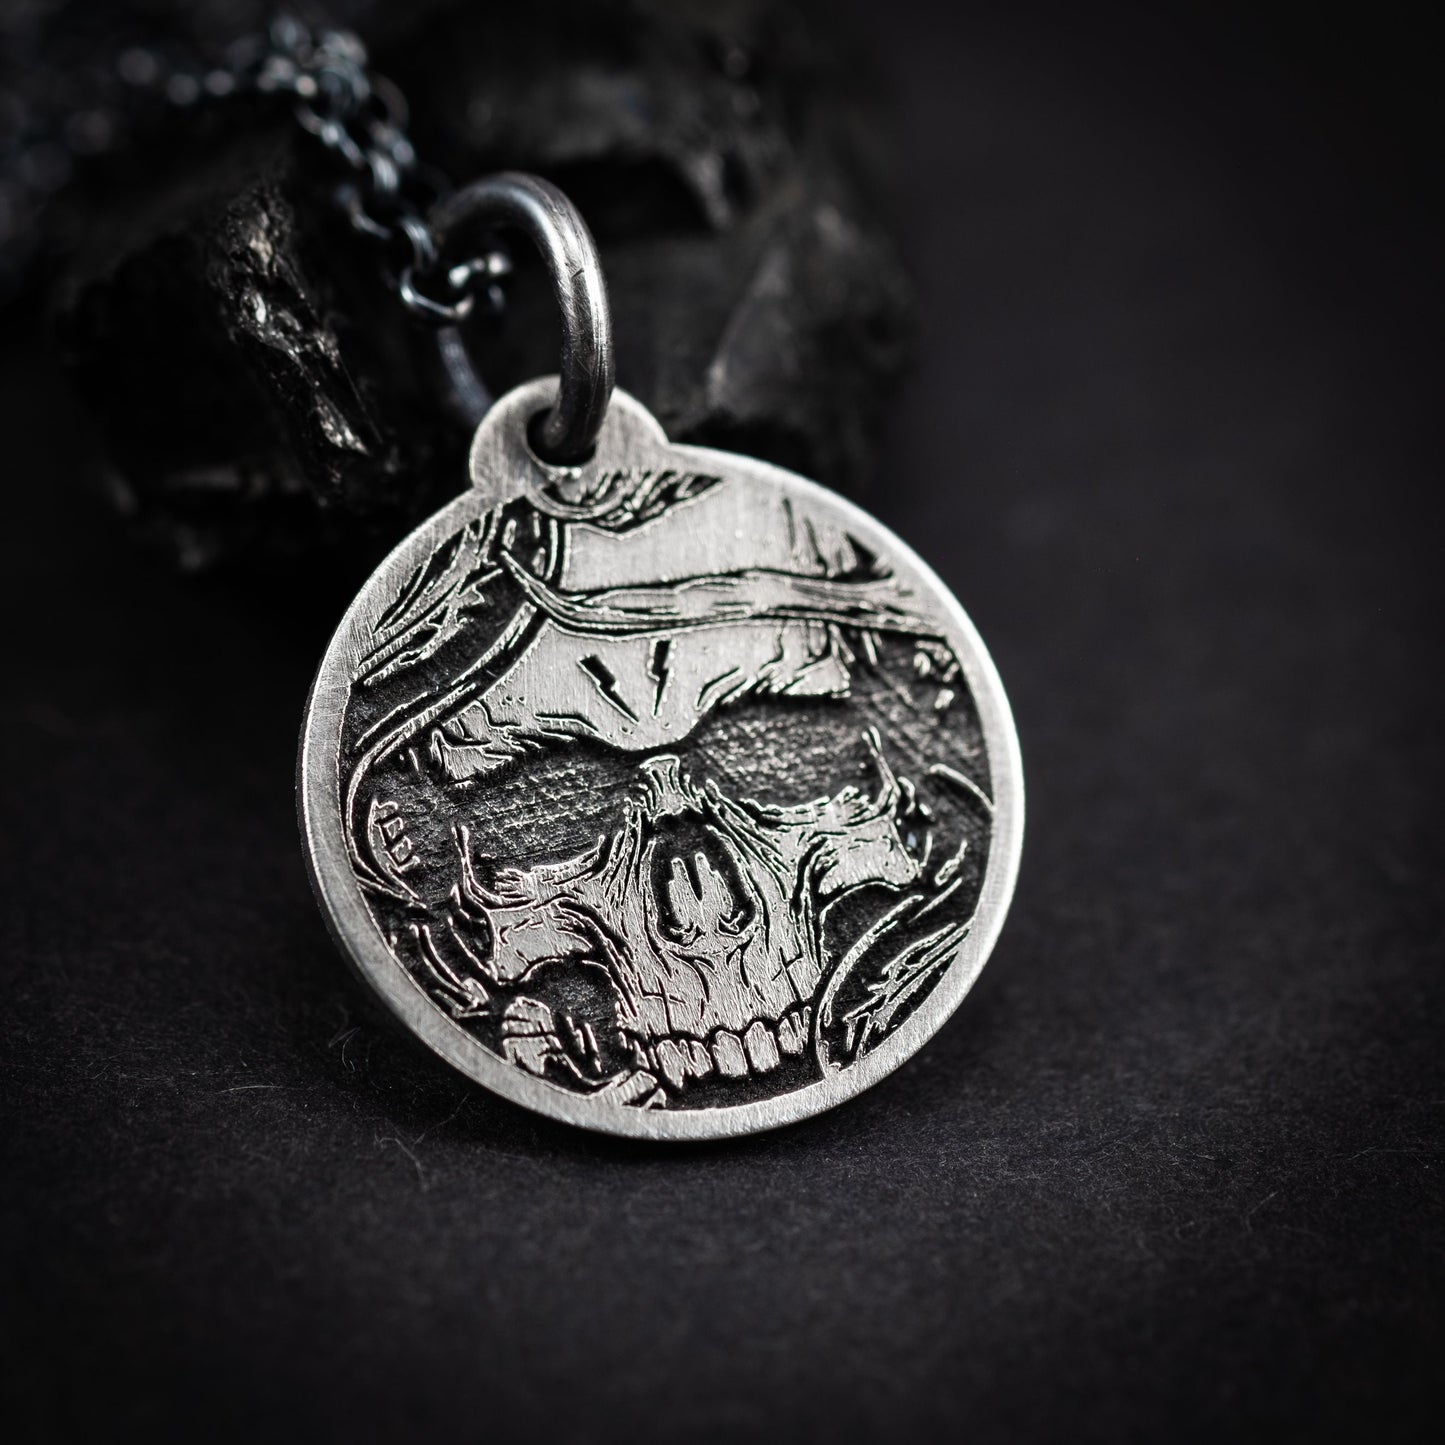 Engraved Custom Mens Skull Silver Necklace, Christmas Memento mori coin men's gift, Engraved personalized jewelry, Death necklace